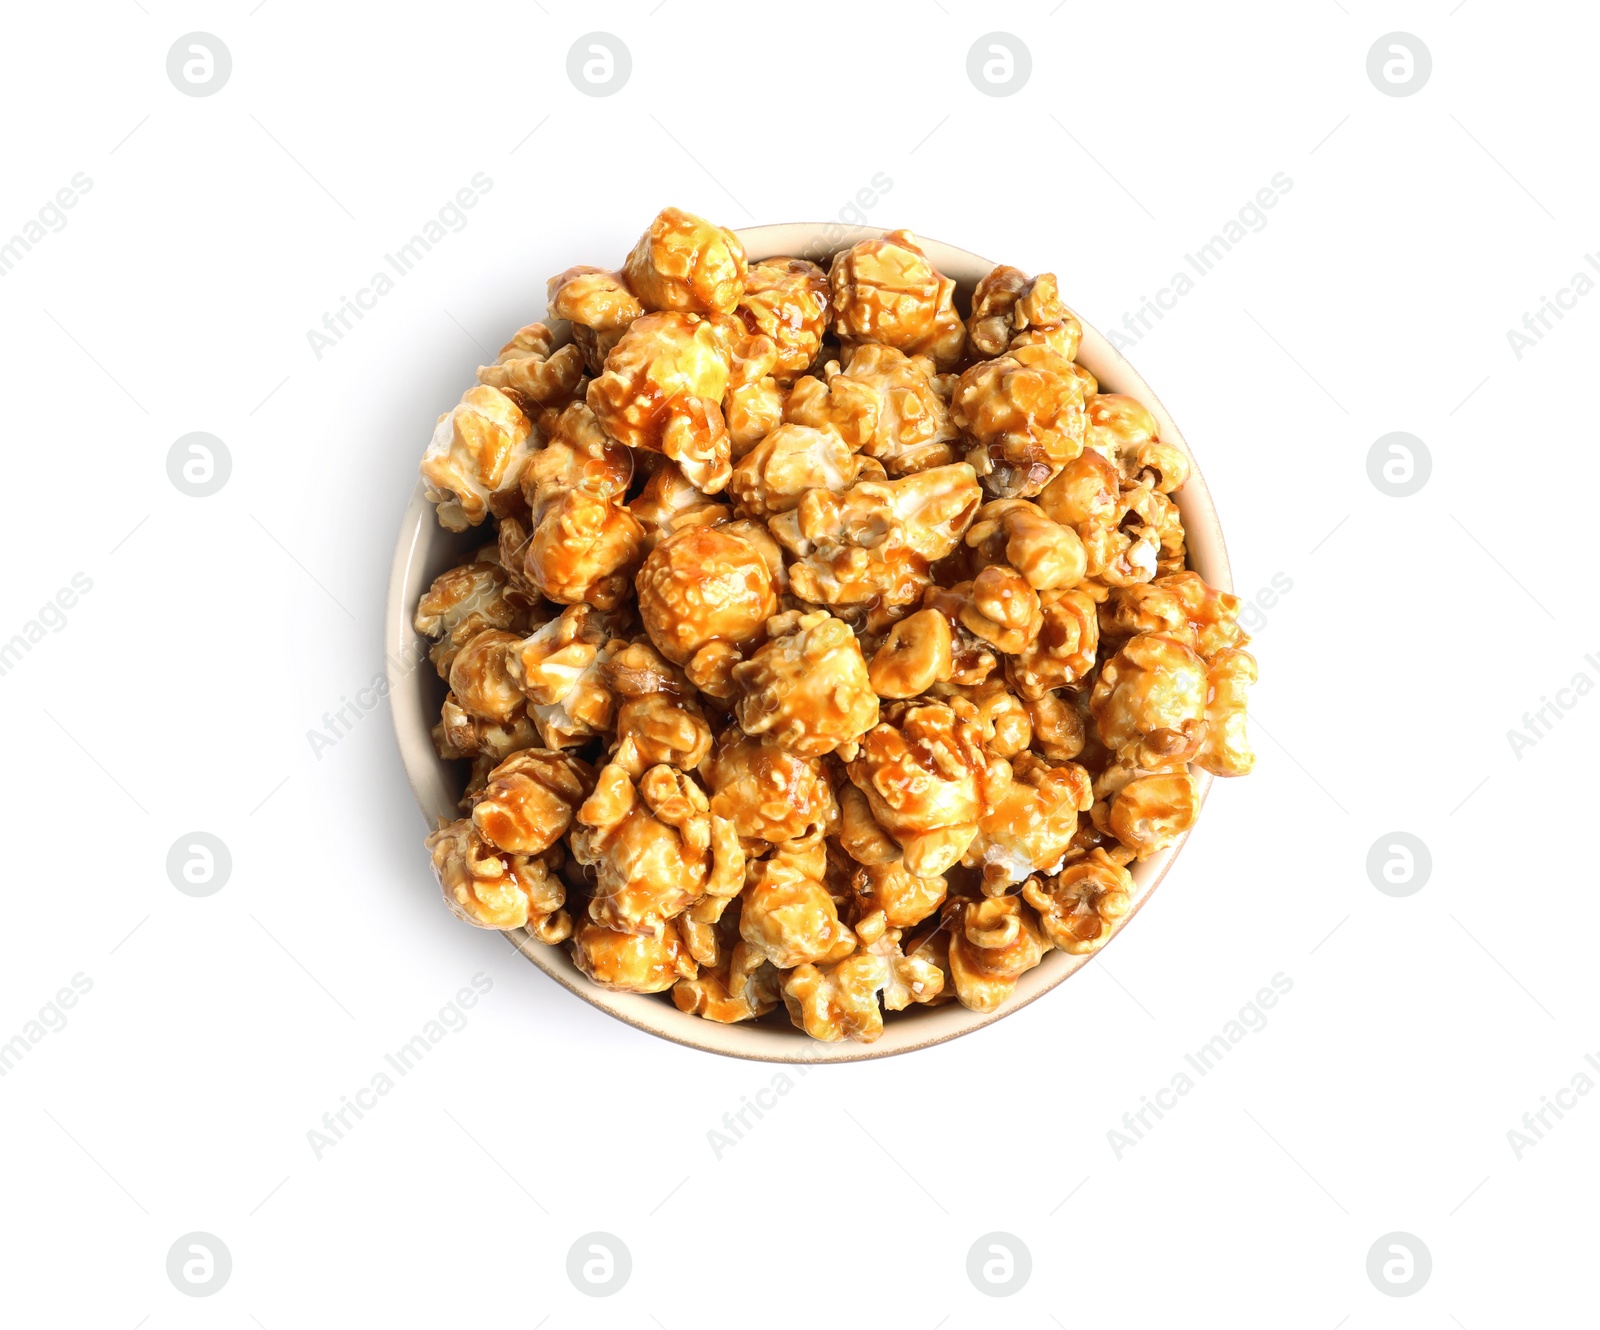 Photo of Delicious popcorn with caramel in bowl on white background